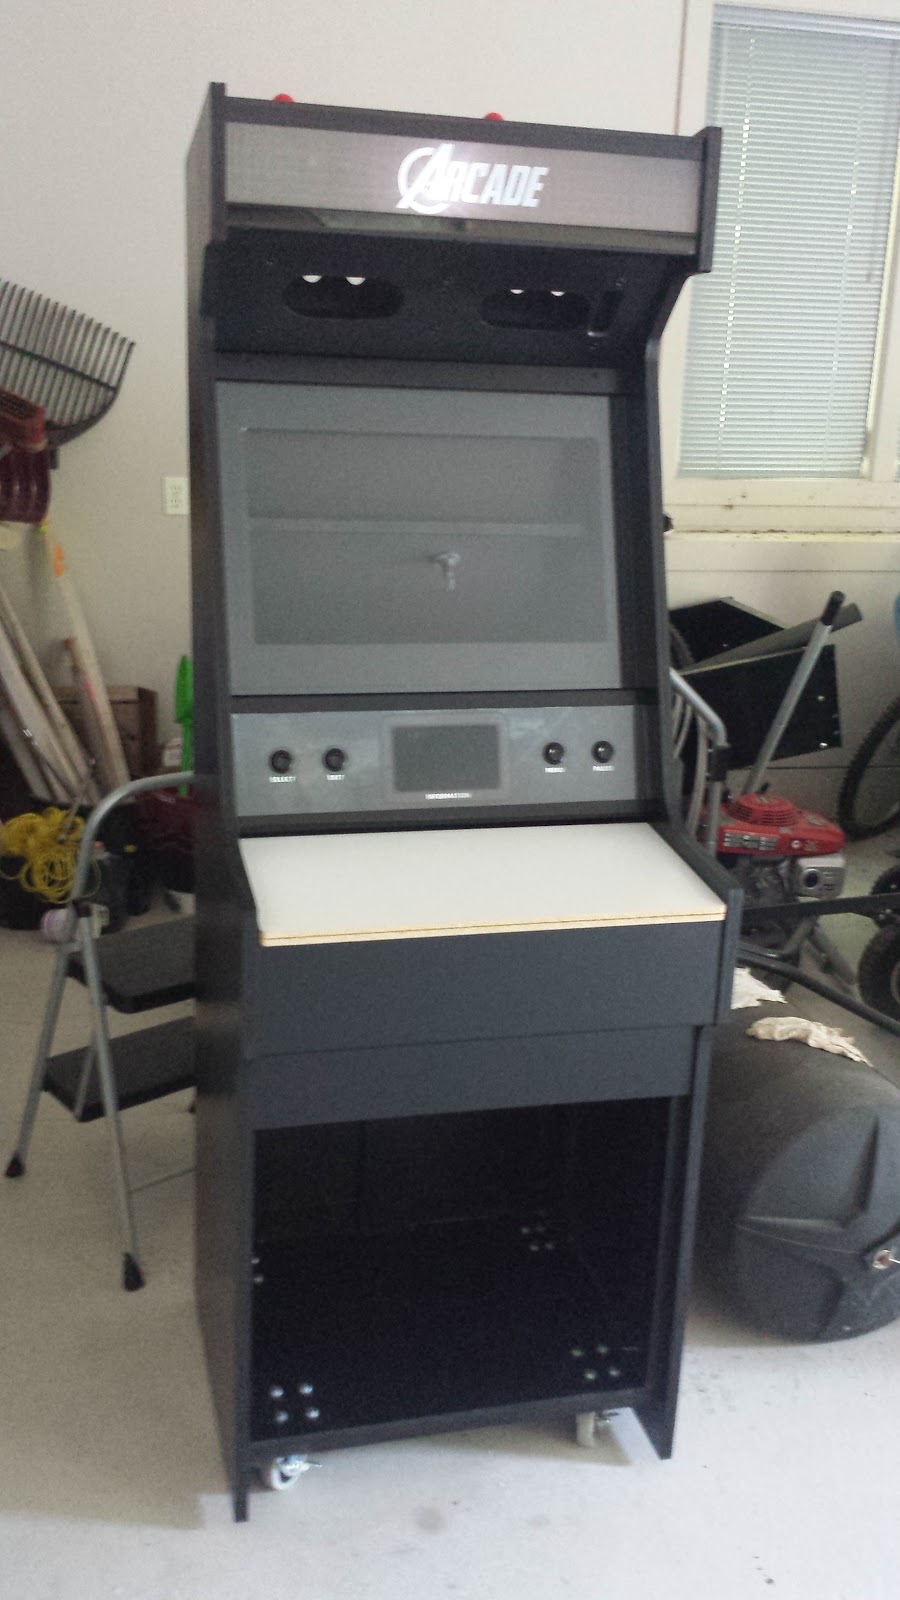 Arcade cabinet, with a blank white panel installed where the controls would usually be